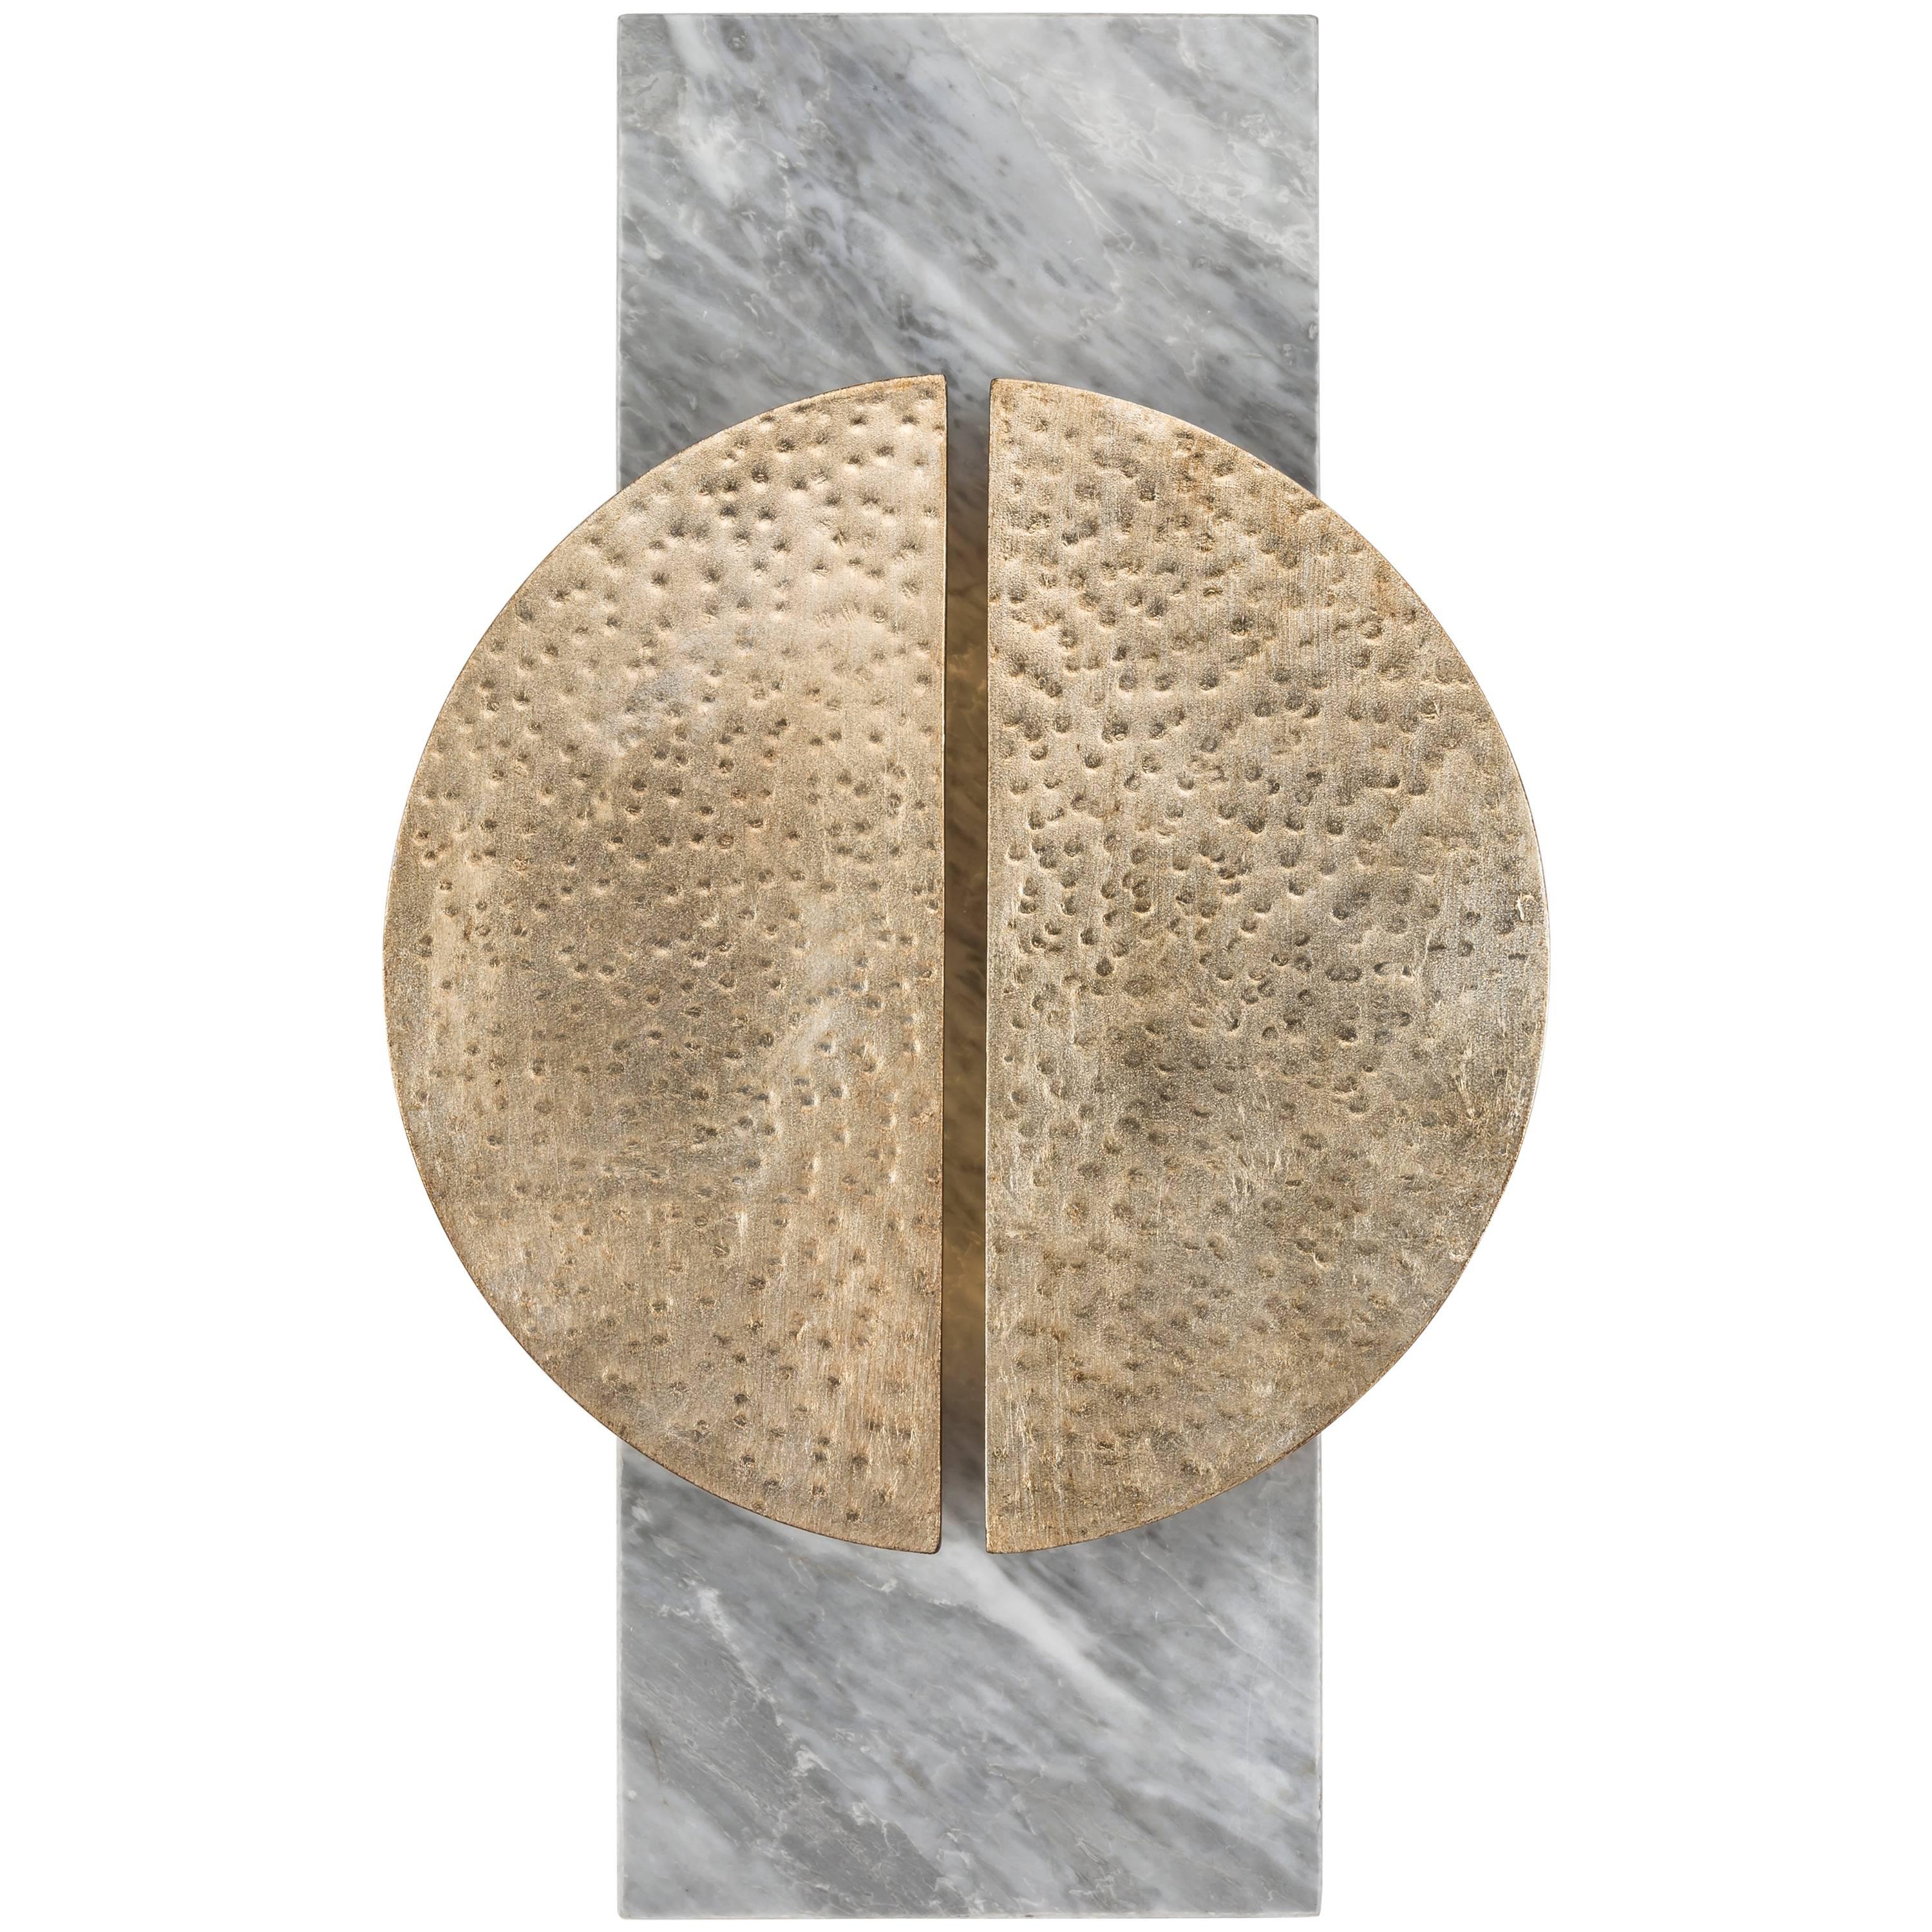 HALO SCONCE - Modern Hand-Forged Leafing Sconce on a Carrara Marble Plate